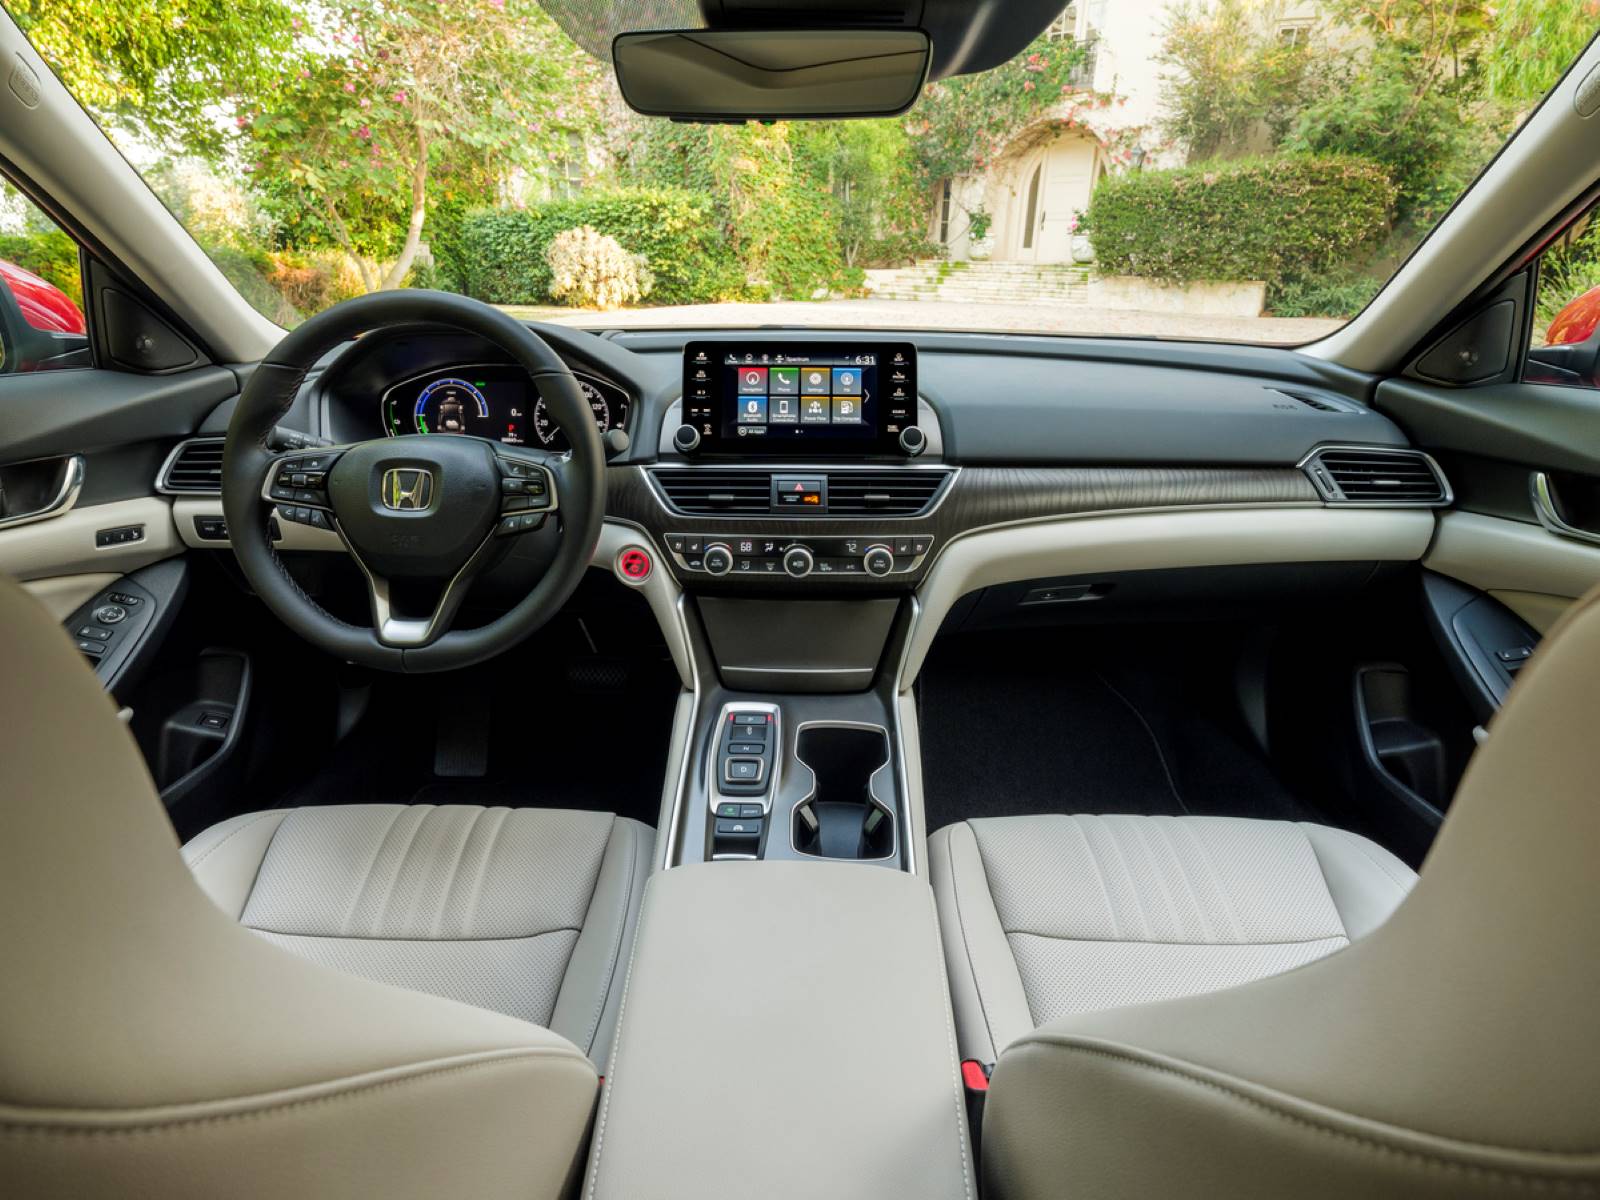 Interior of the 2022 Honda Accord Hybrid, a great car for driving rideshare